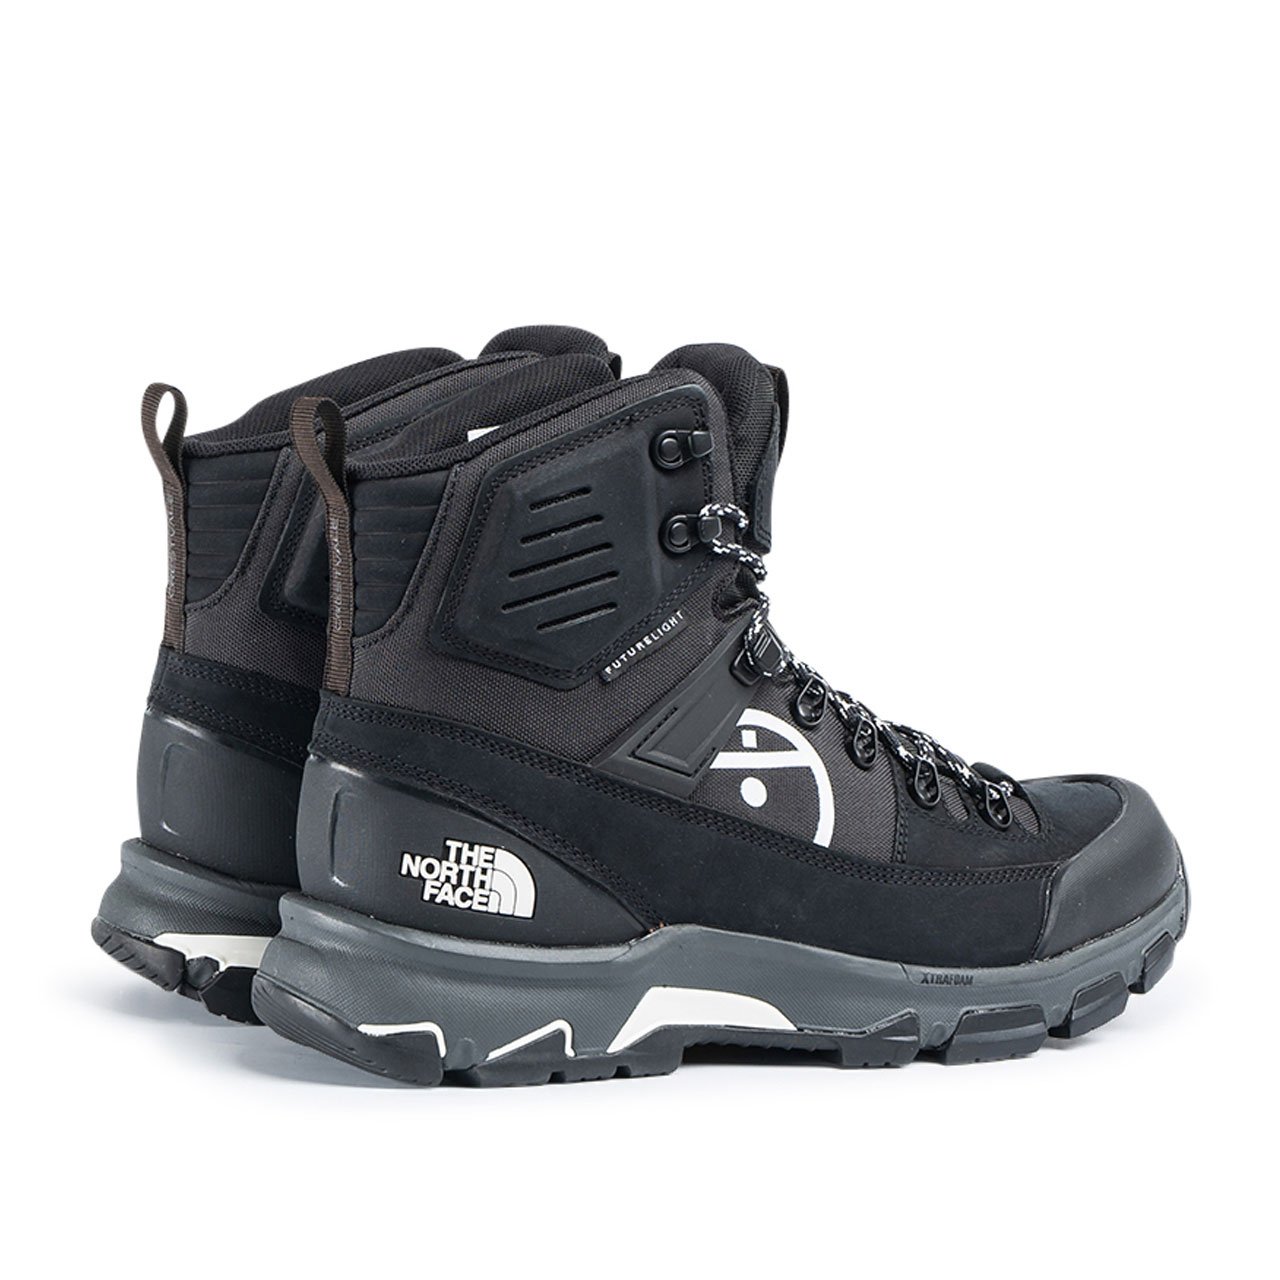 the north face black series steep tech crestvale boots (black) - nf0a4t2nky4 - a.plus - Image - 4